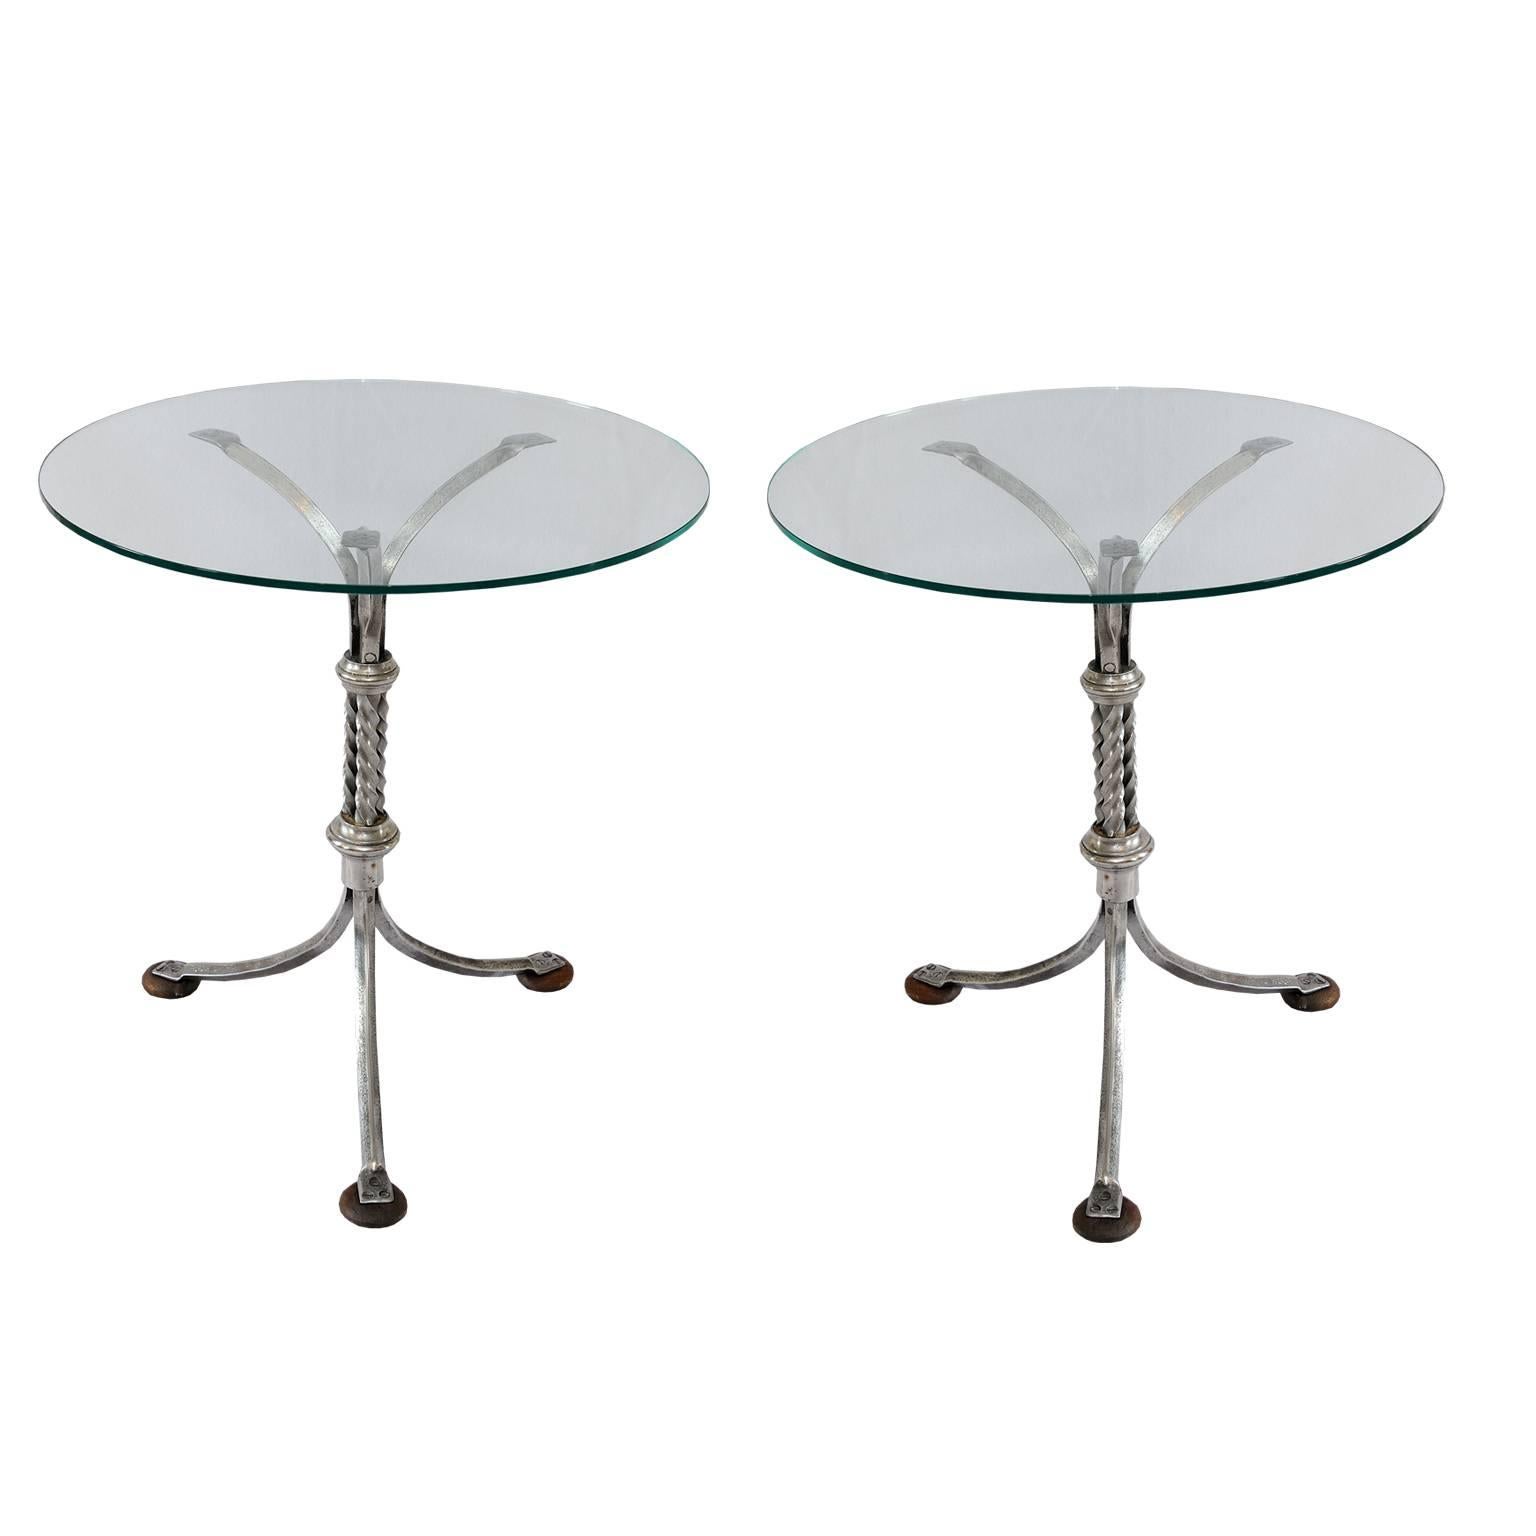 Pair of Mid-19th Century Polished Wrought Iron Ships Tables, circa 1860 For Sale